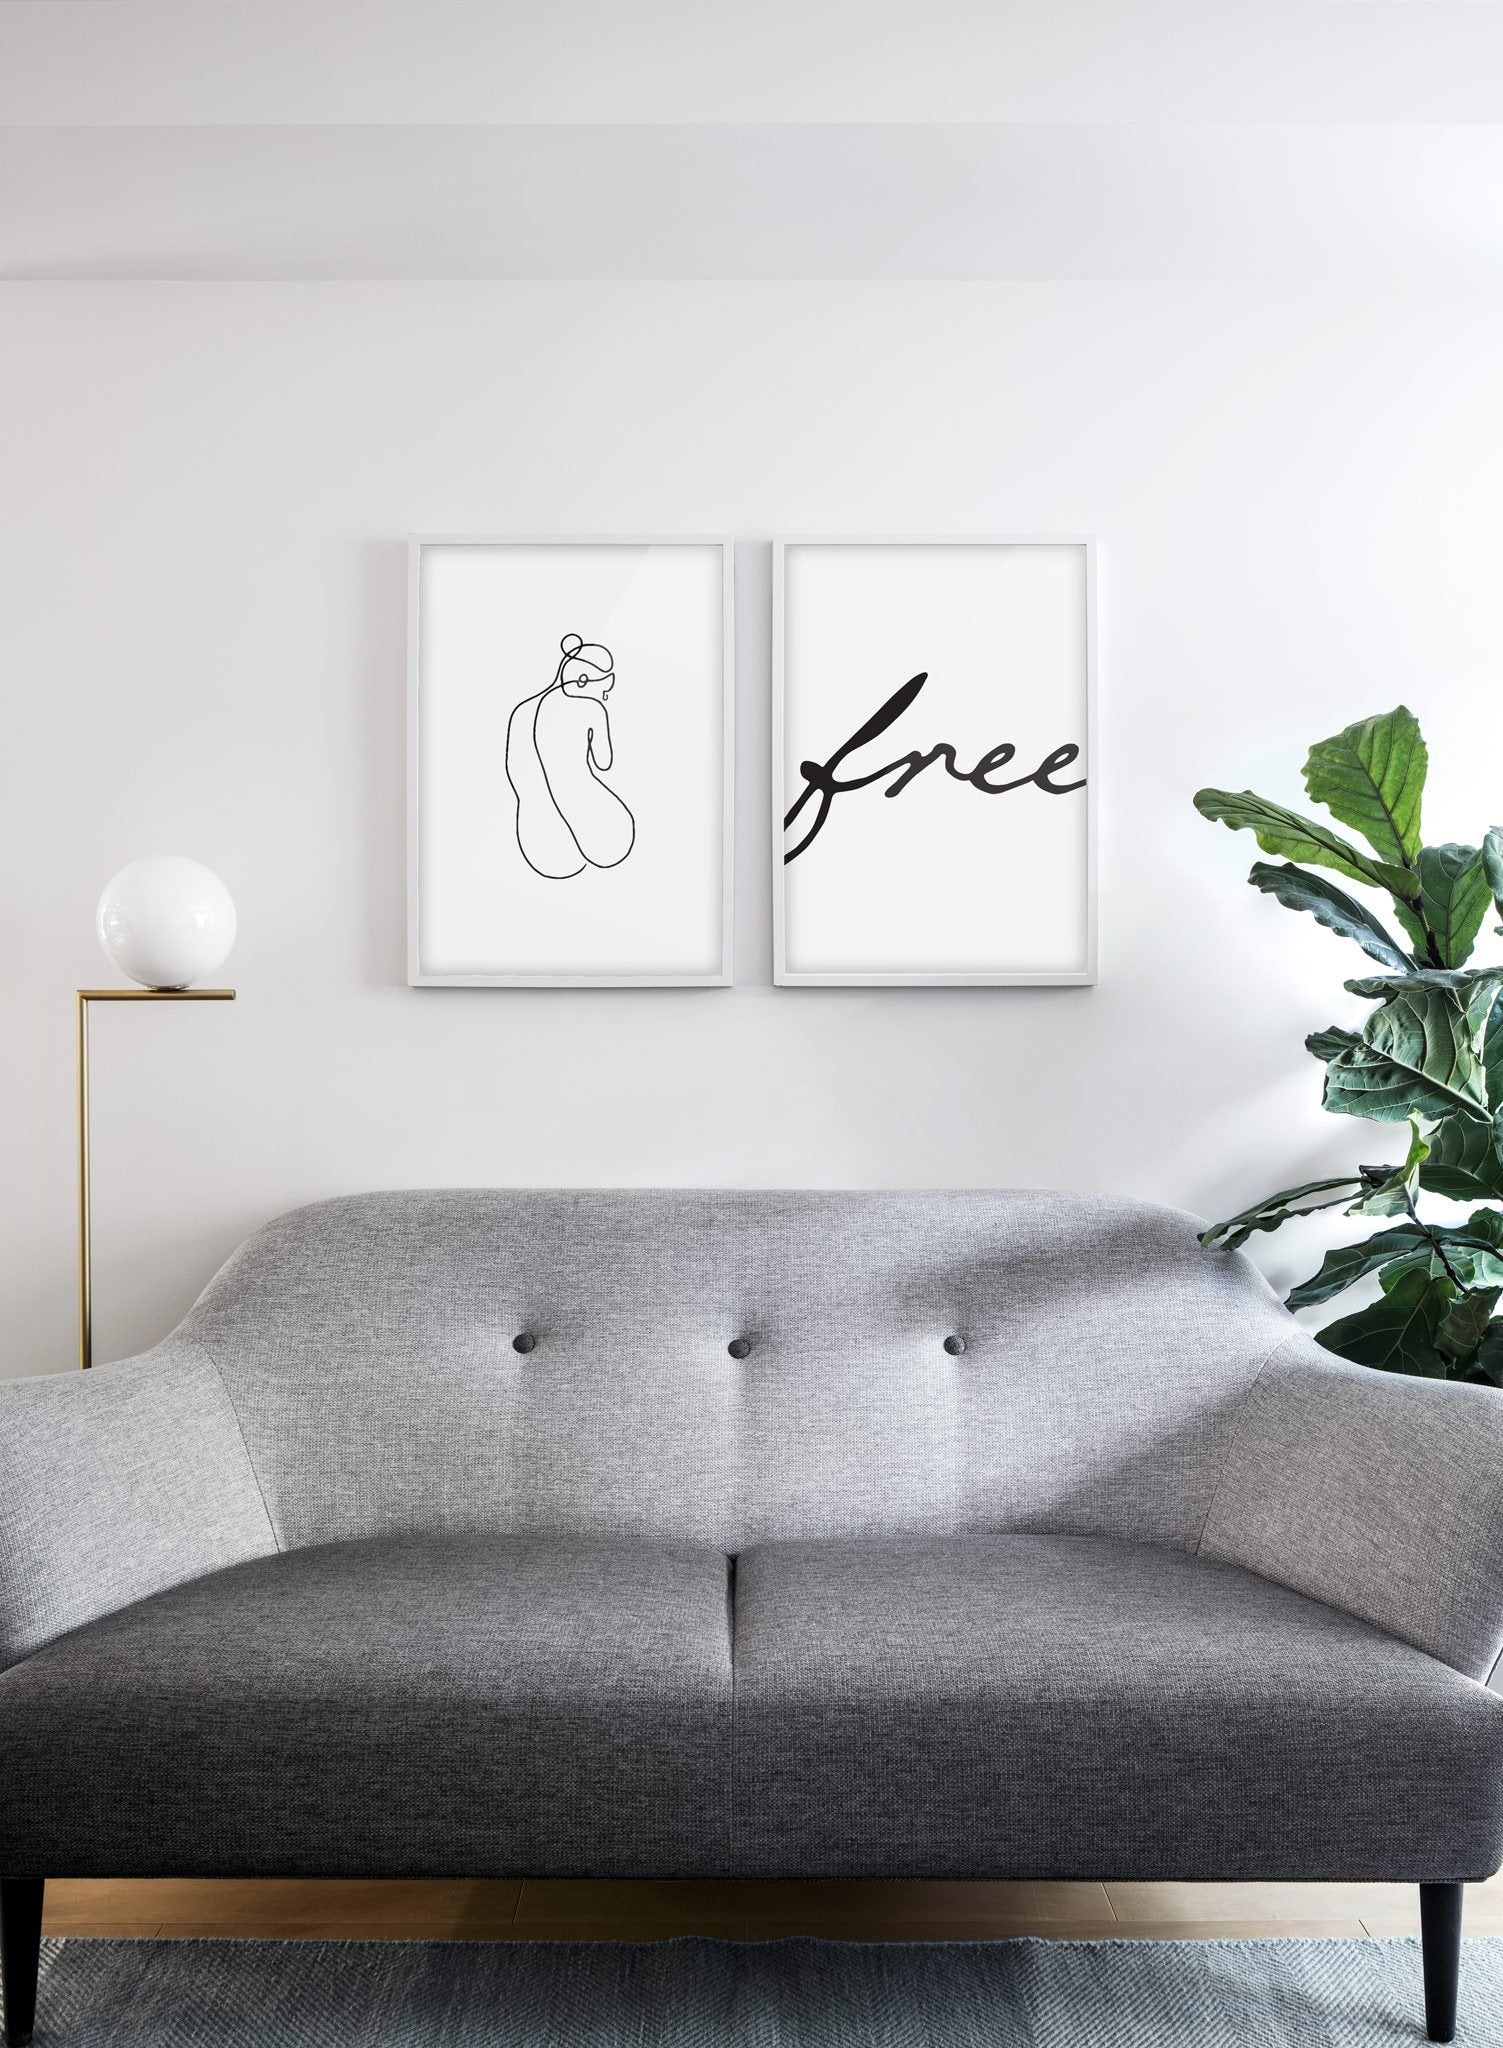 Modern minimalist poster by Opposite Wall with abstract illustration of Silhouette and free typography - living room